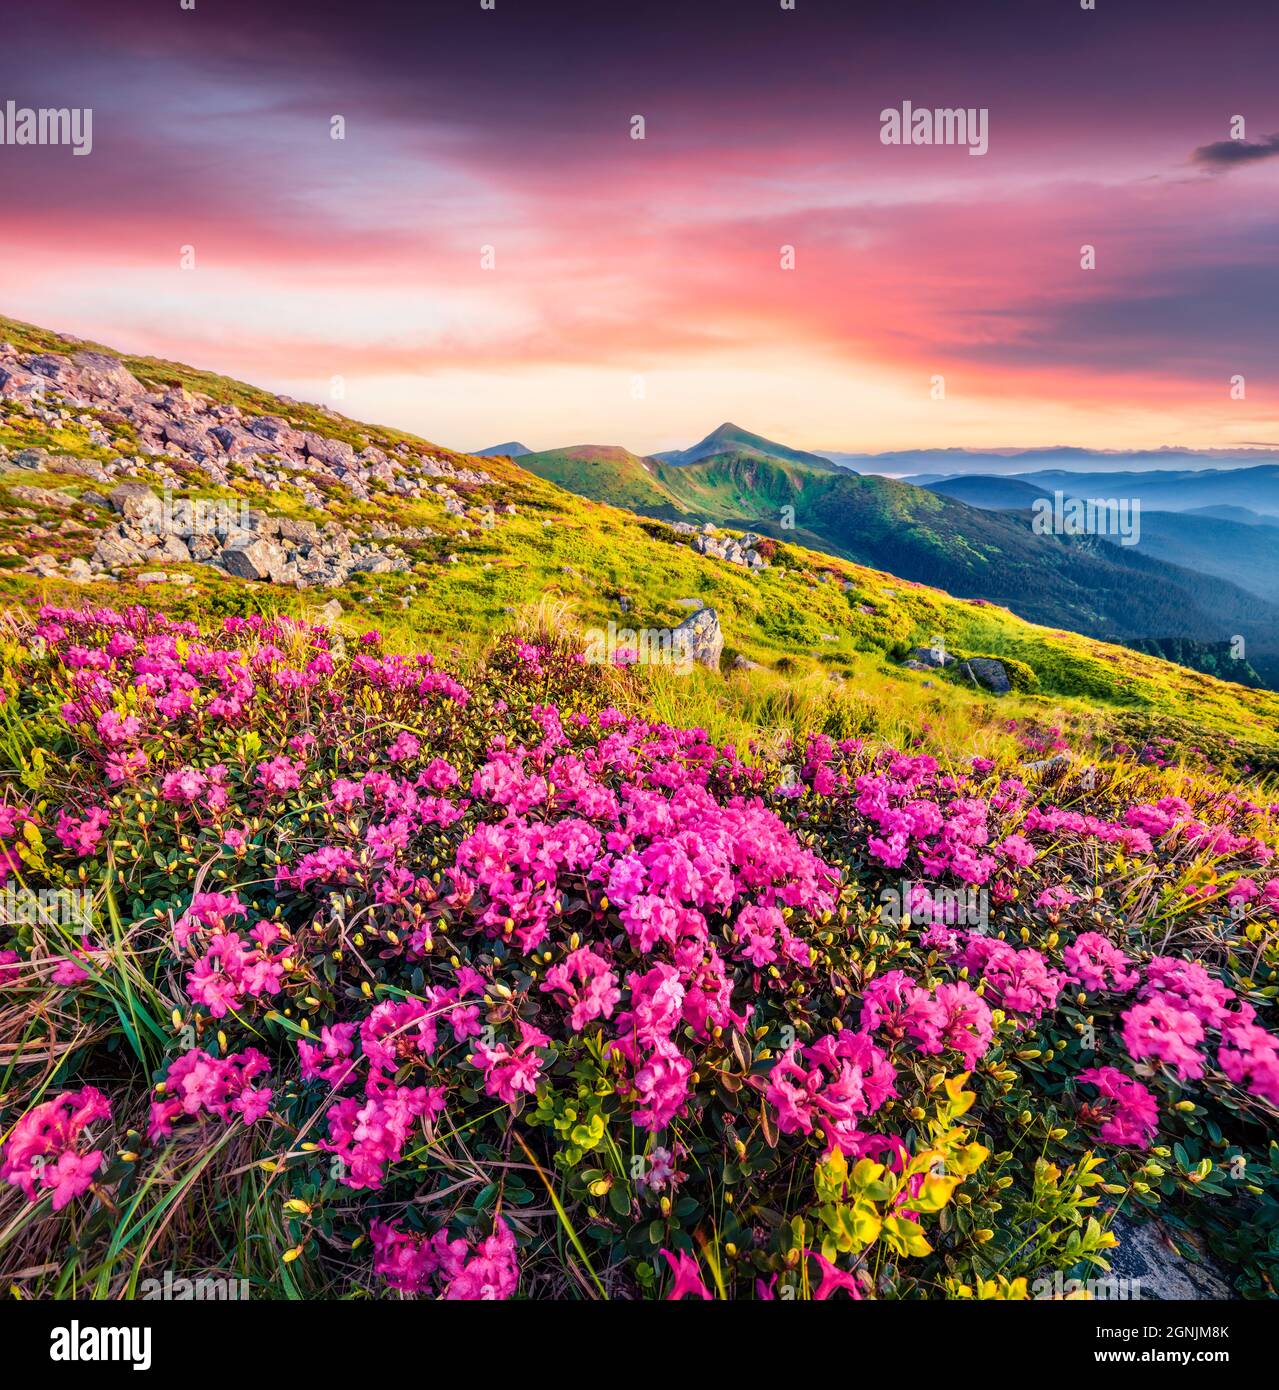 Blooming pink rhododendron flowers on Chornogora ridge. Unbelievable summer view of Carpathian mountains with highest peak Hoverla on background, Ukra Stock Photo